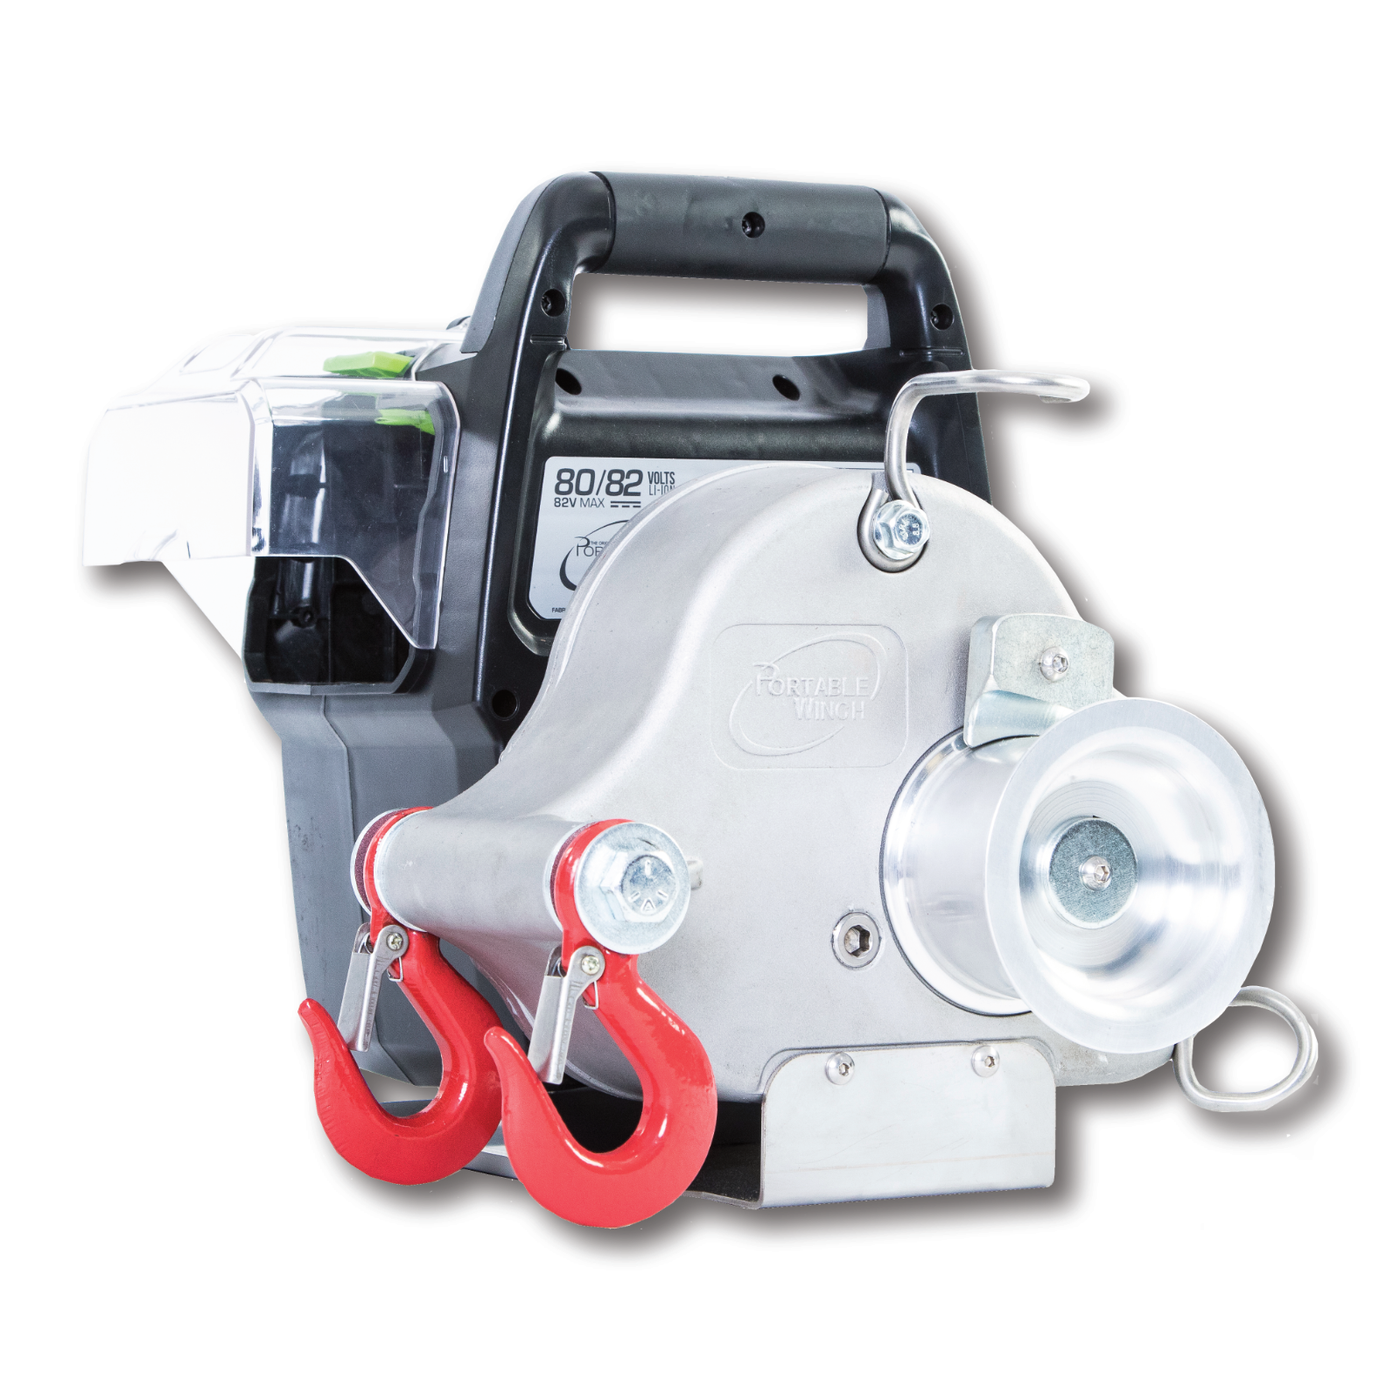 Battery powered portable winch - 2